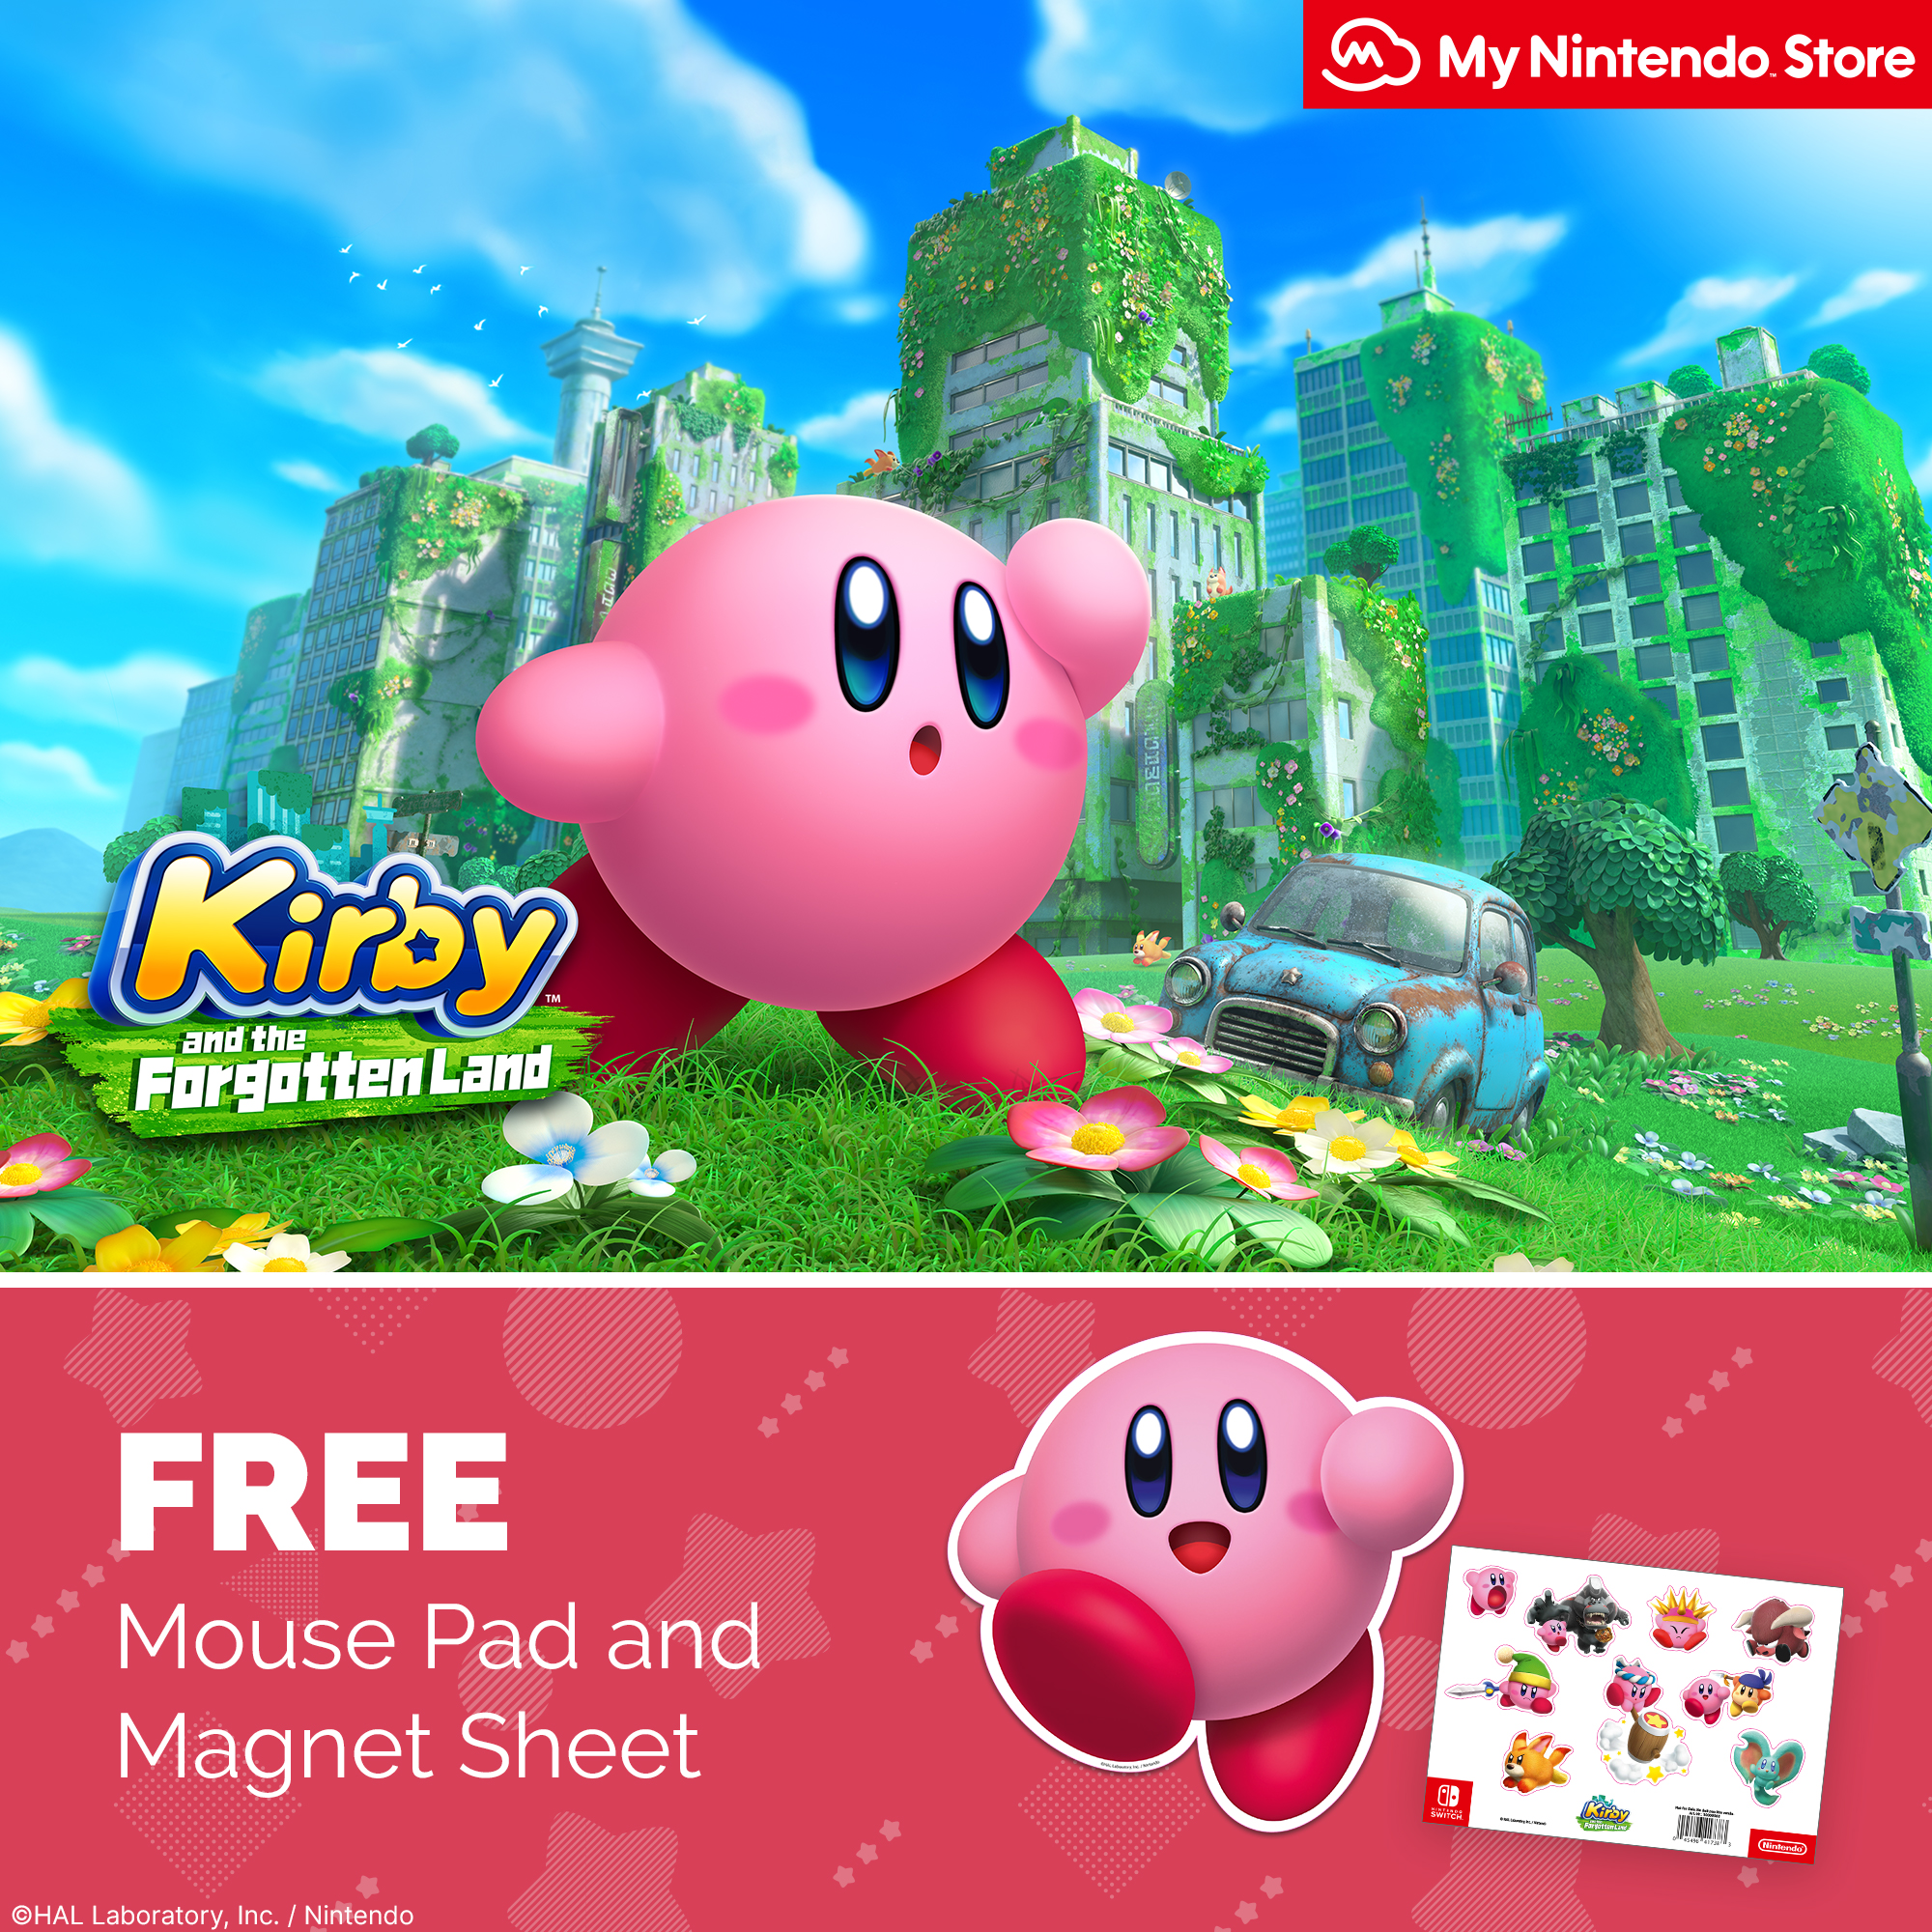 Pre-order Kirby and the Forgotten Land on My Nintendo Store and receive free gifts!